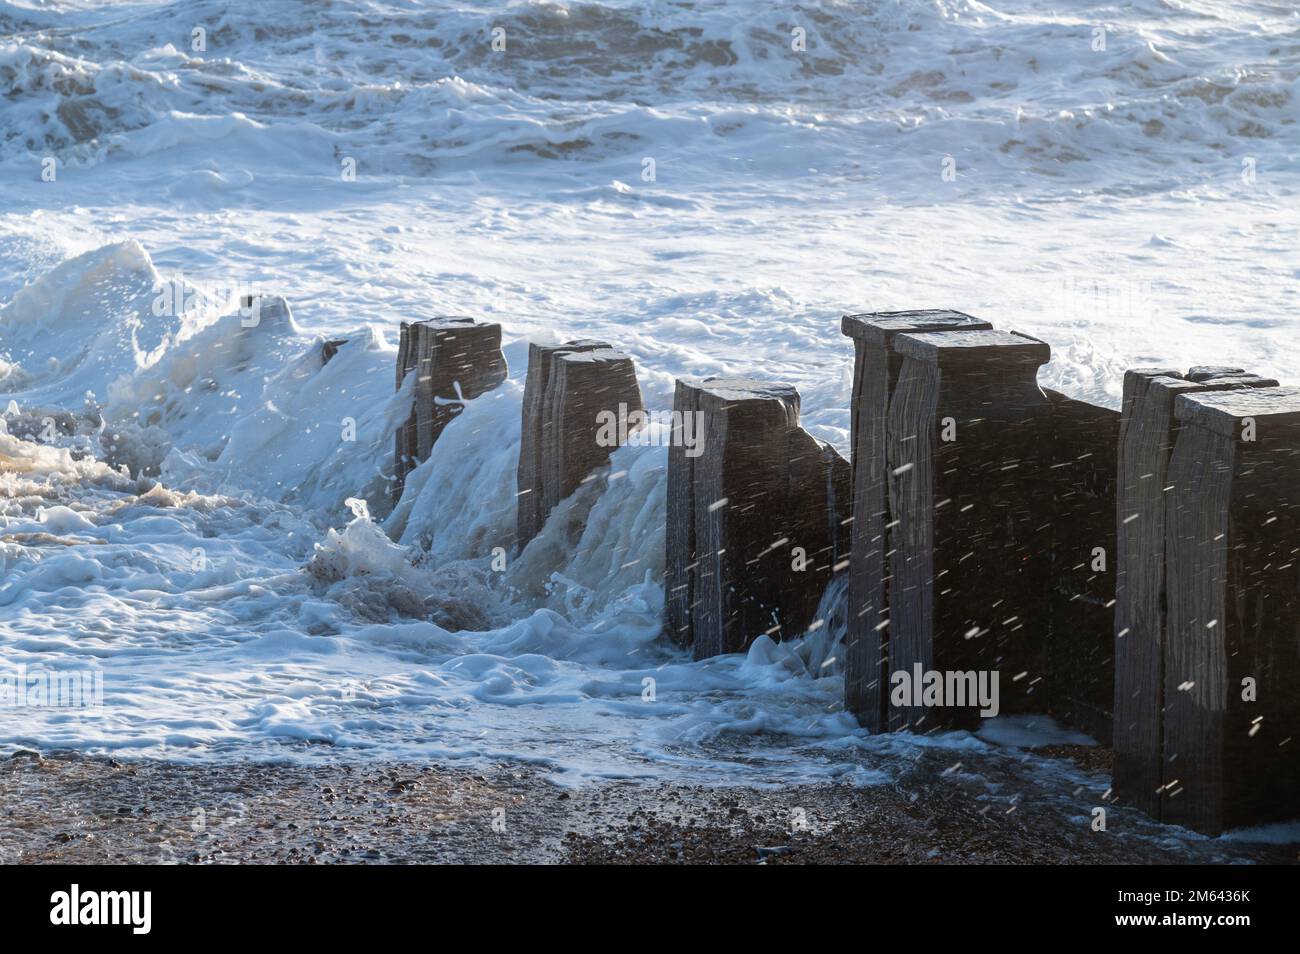 Wooden beach groyne, waves and spray, Bexhill-on-Sea, England Stock Photo